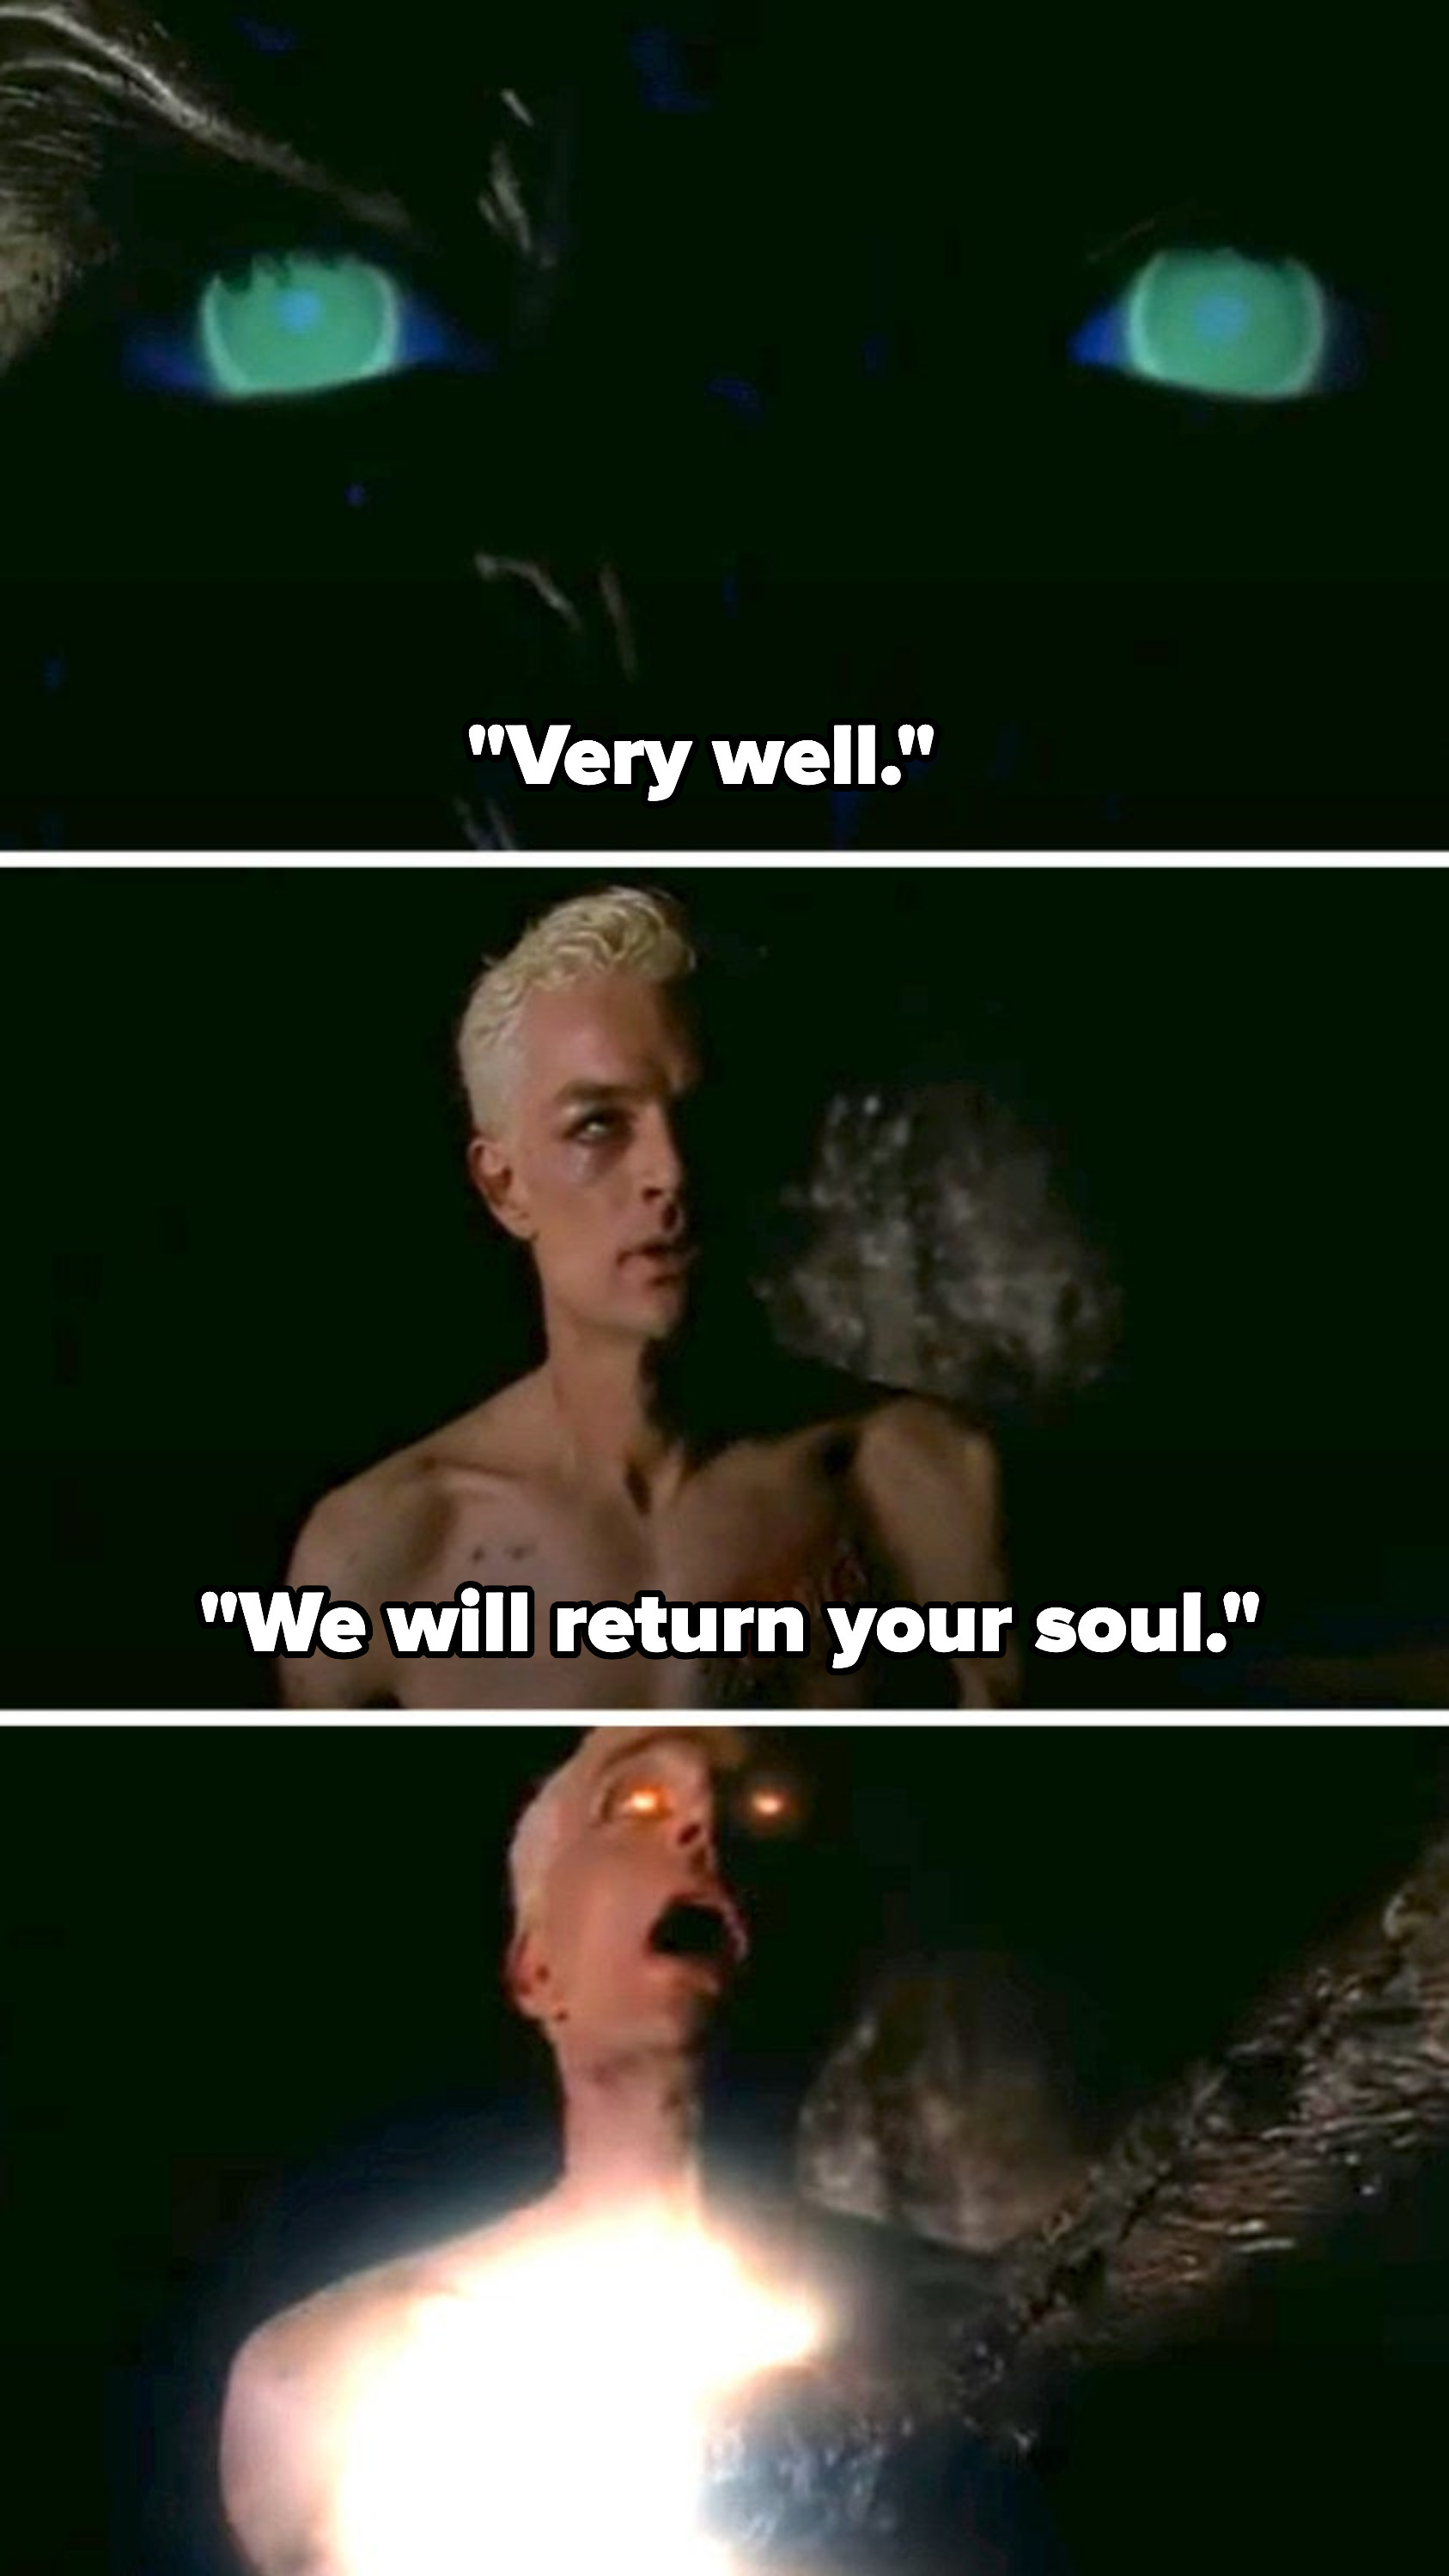 Spike is told his soul will be returned